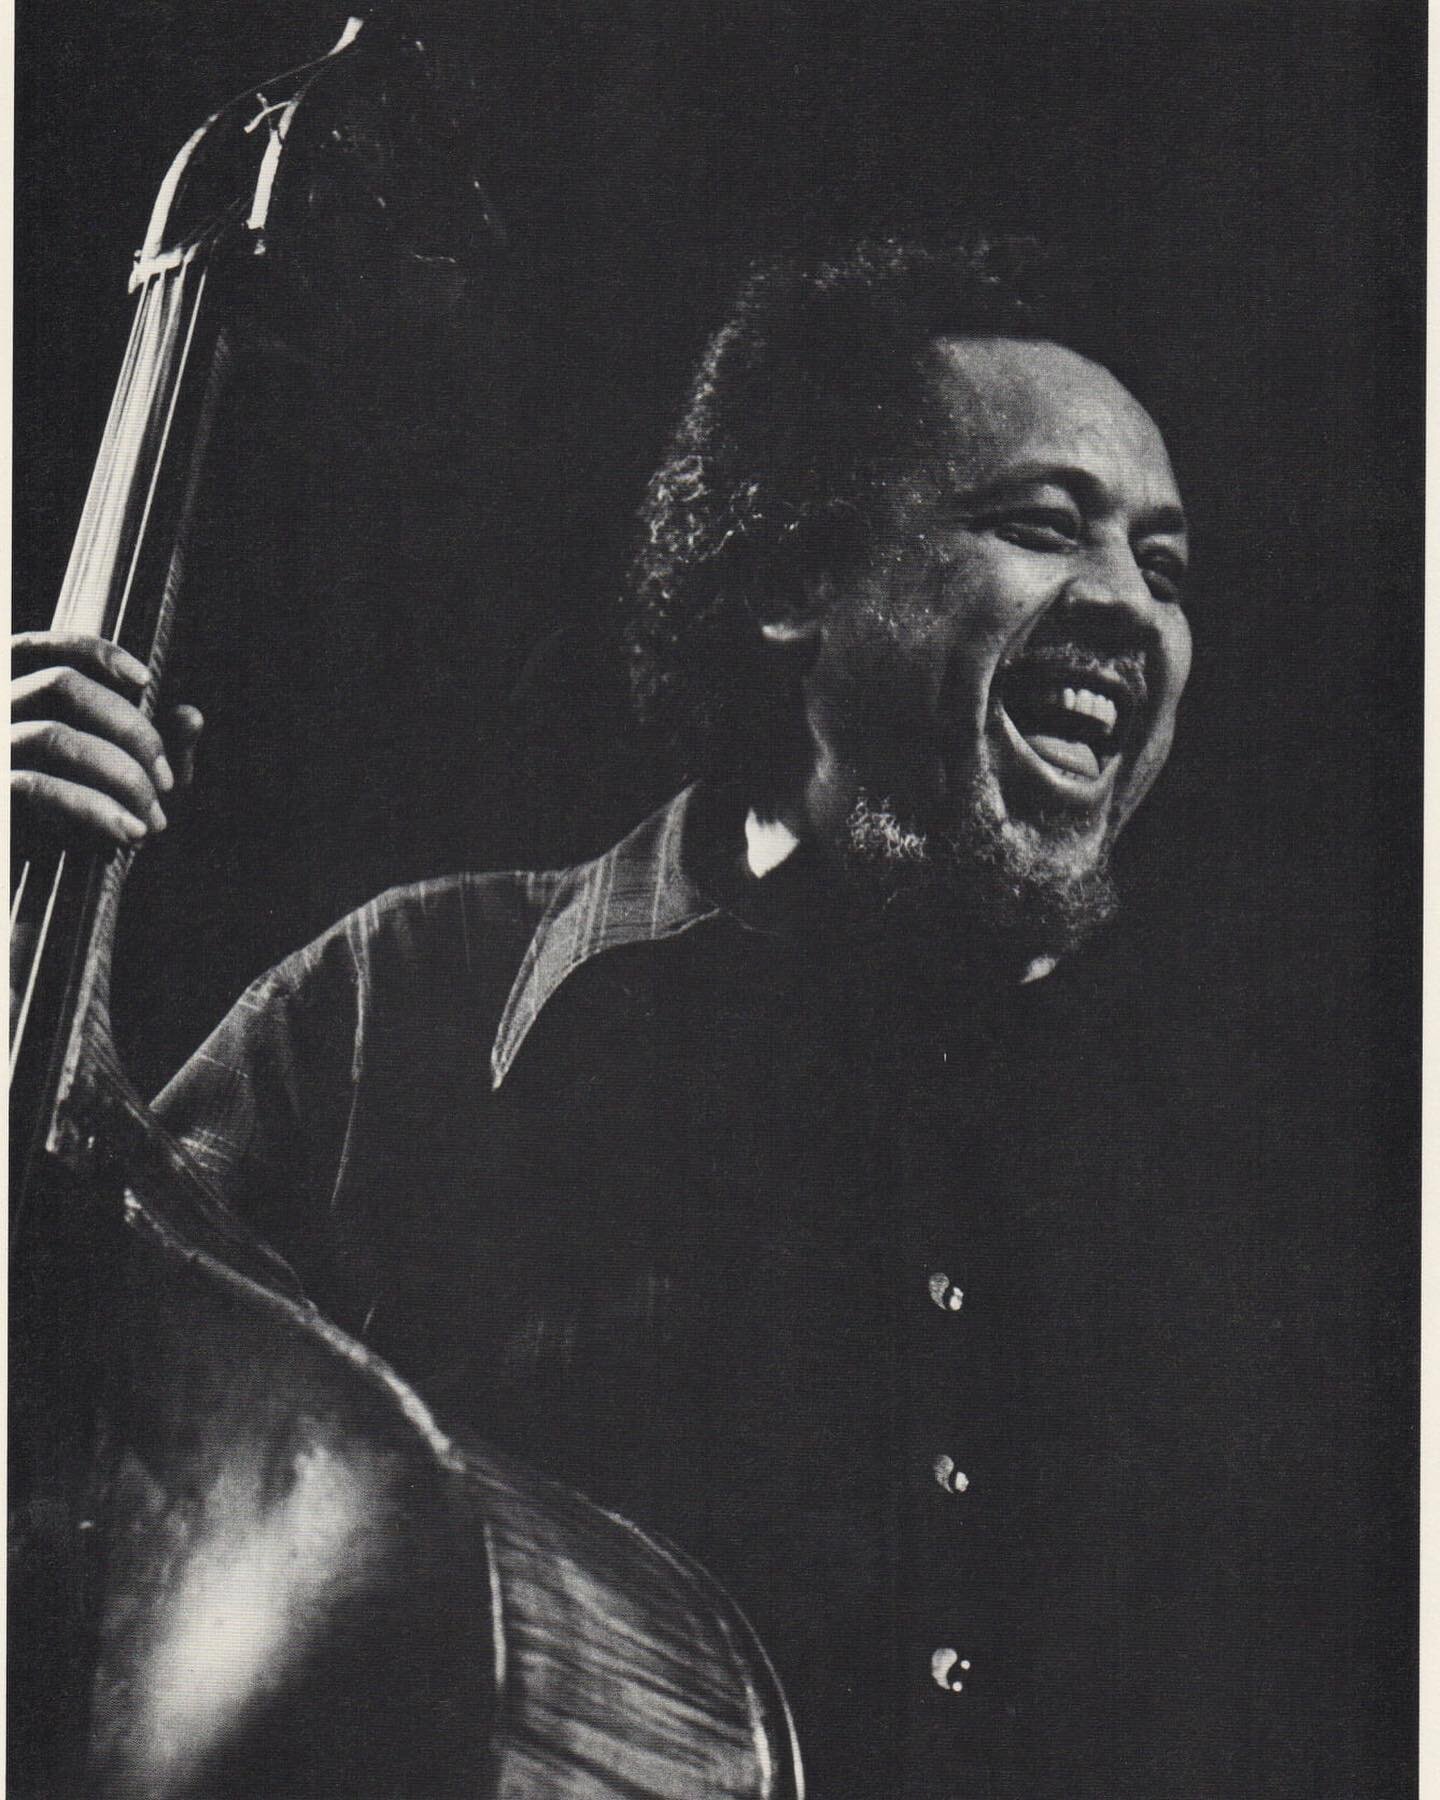 Charles Mingus at The Great American Music Hall in San Francisco, CA - April 18, 1977

Photo by Bruce Polonsky